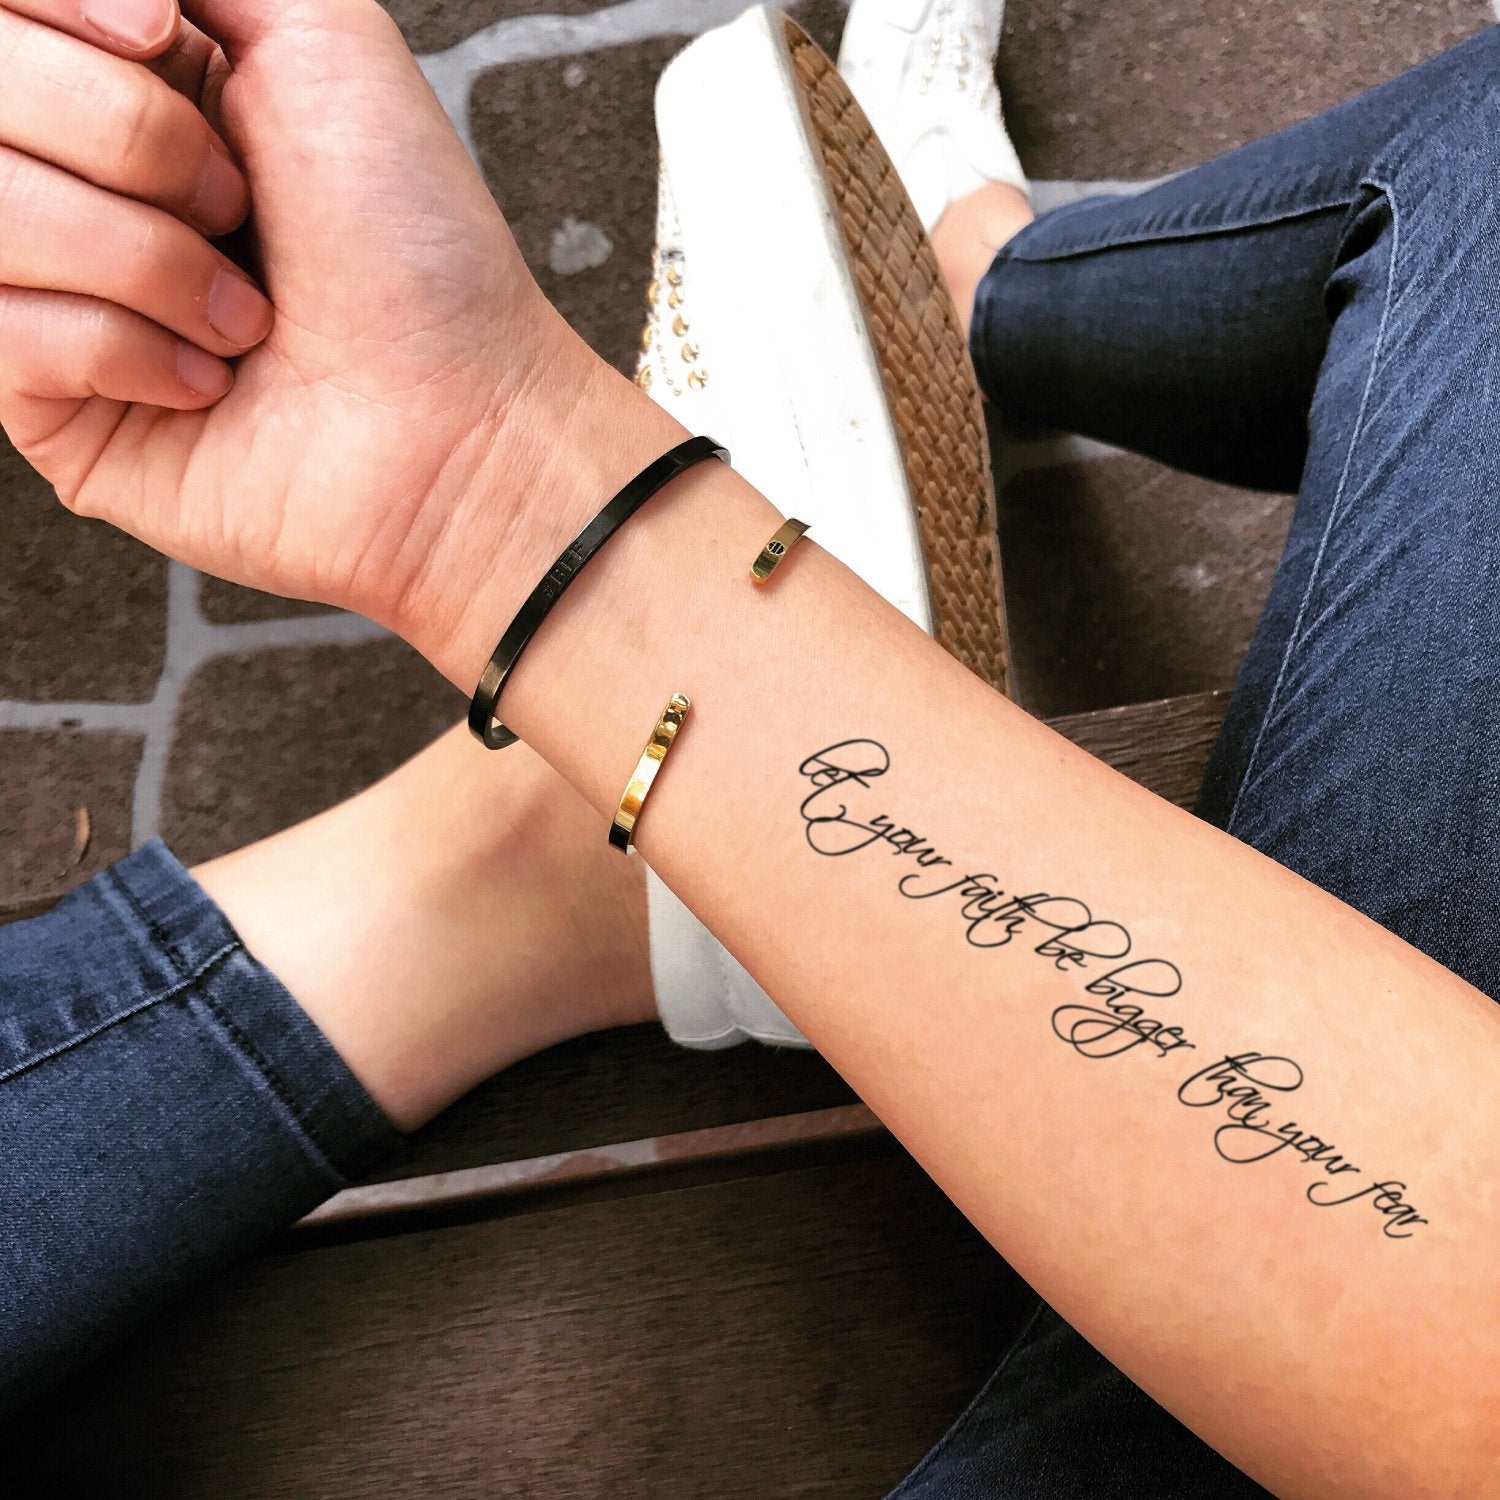 fake medium let your faith be bigger than your fear lettering temporary tattoo sticker design idea on forearm